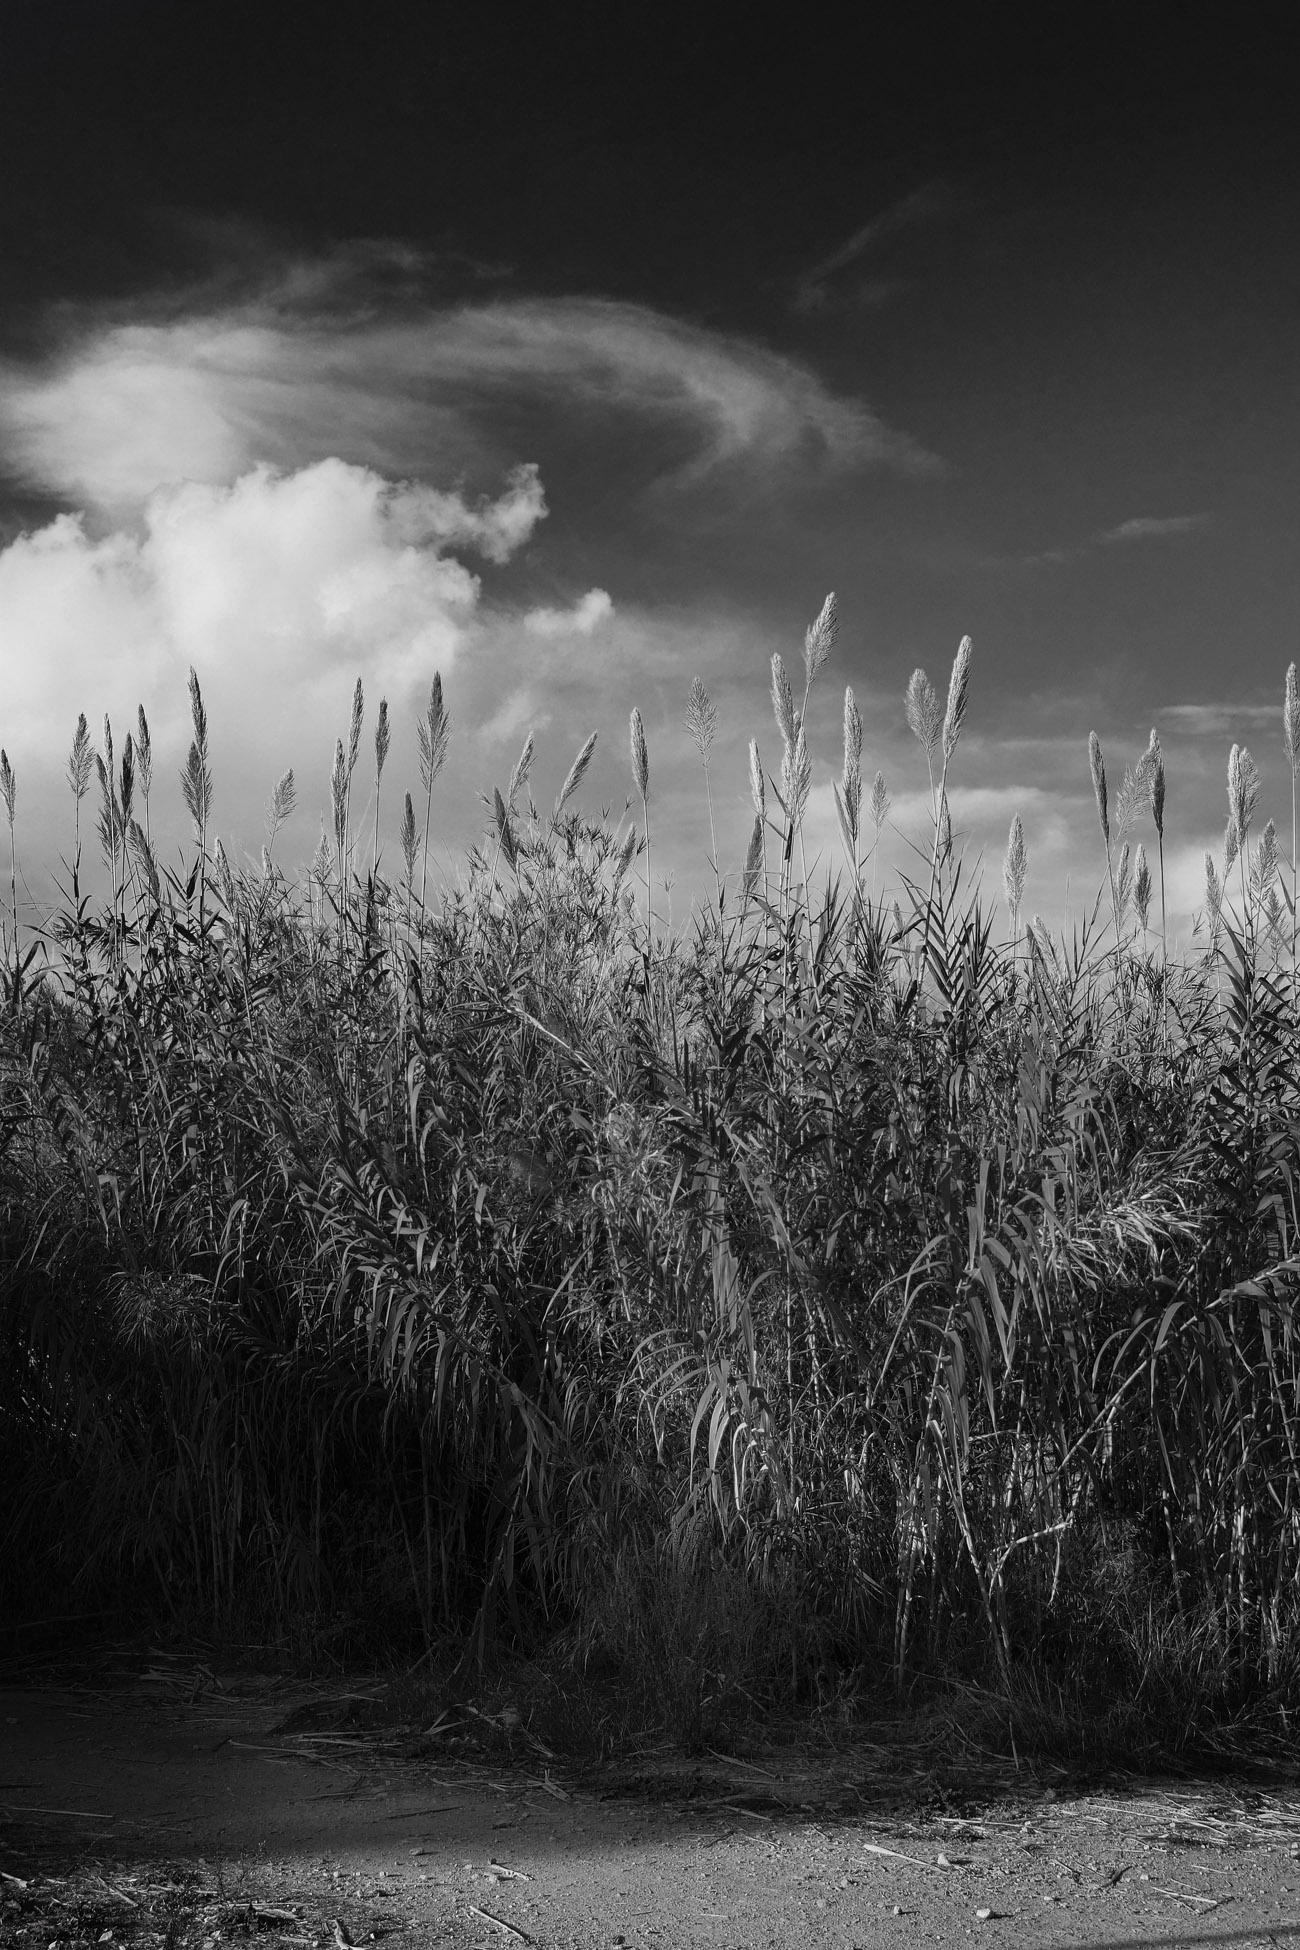 a black and white image with reeds blowing in the wind